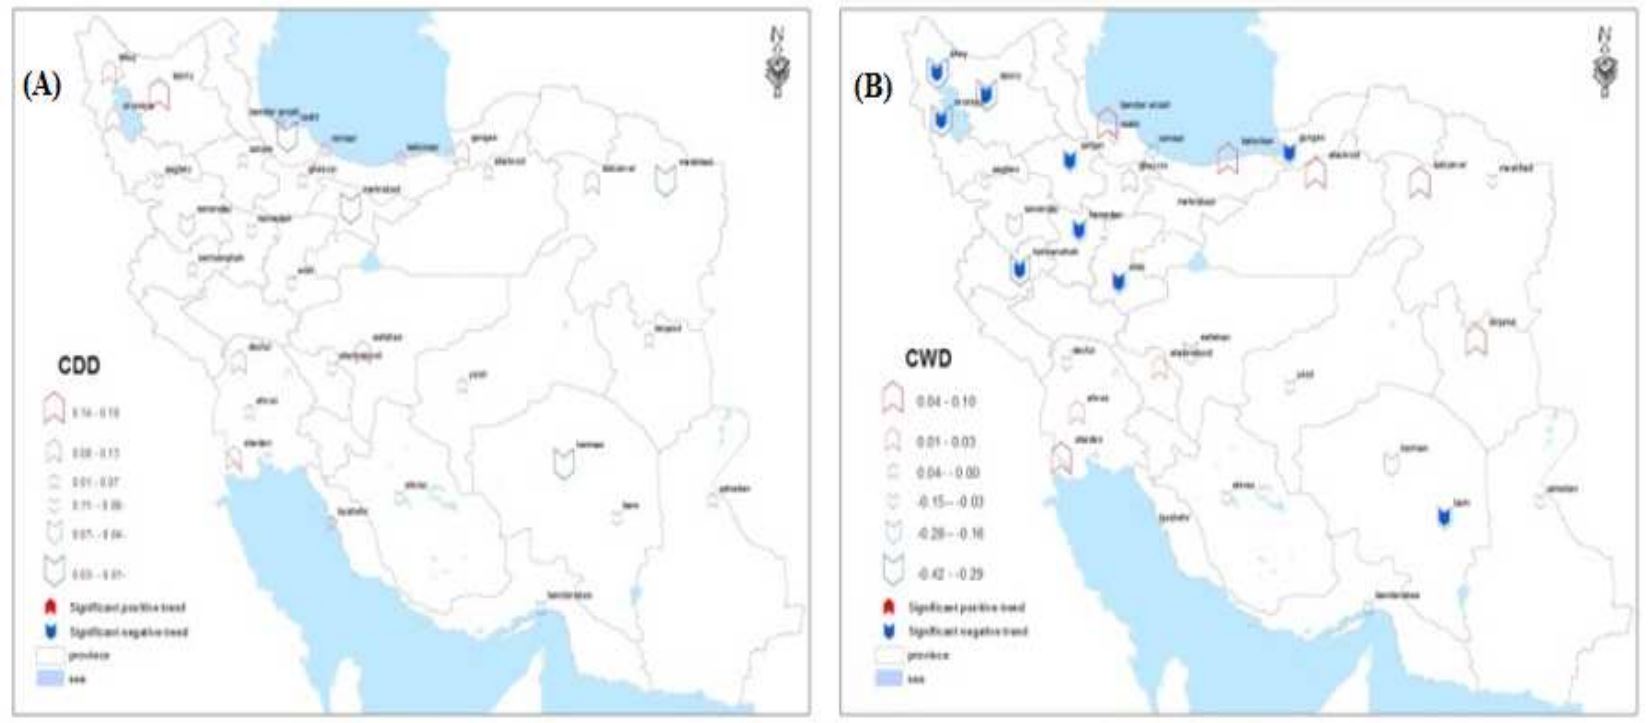 Spatiotemporal Trends in CWD, CDD across Iran